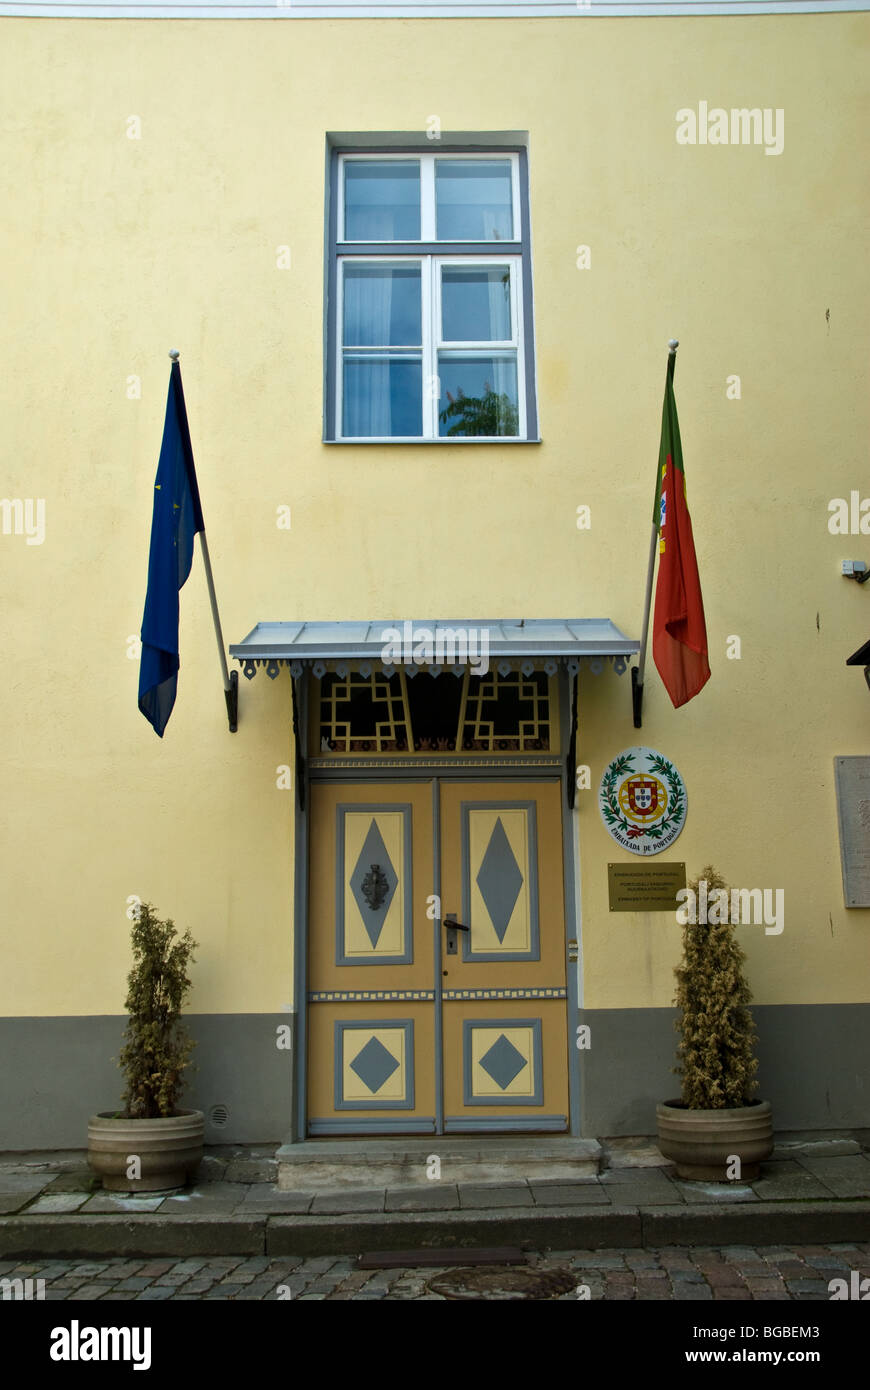 The decorated doorway of the Potuguese Embssy in Tallinn Stock Photo